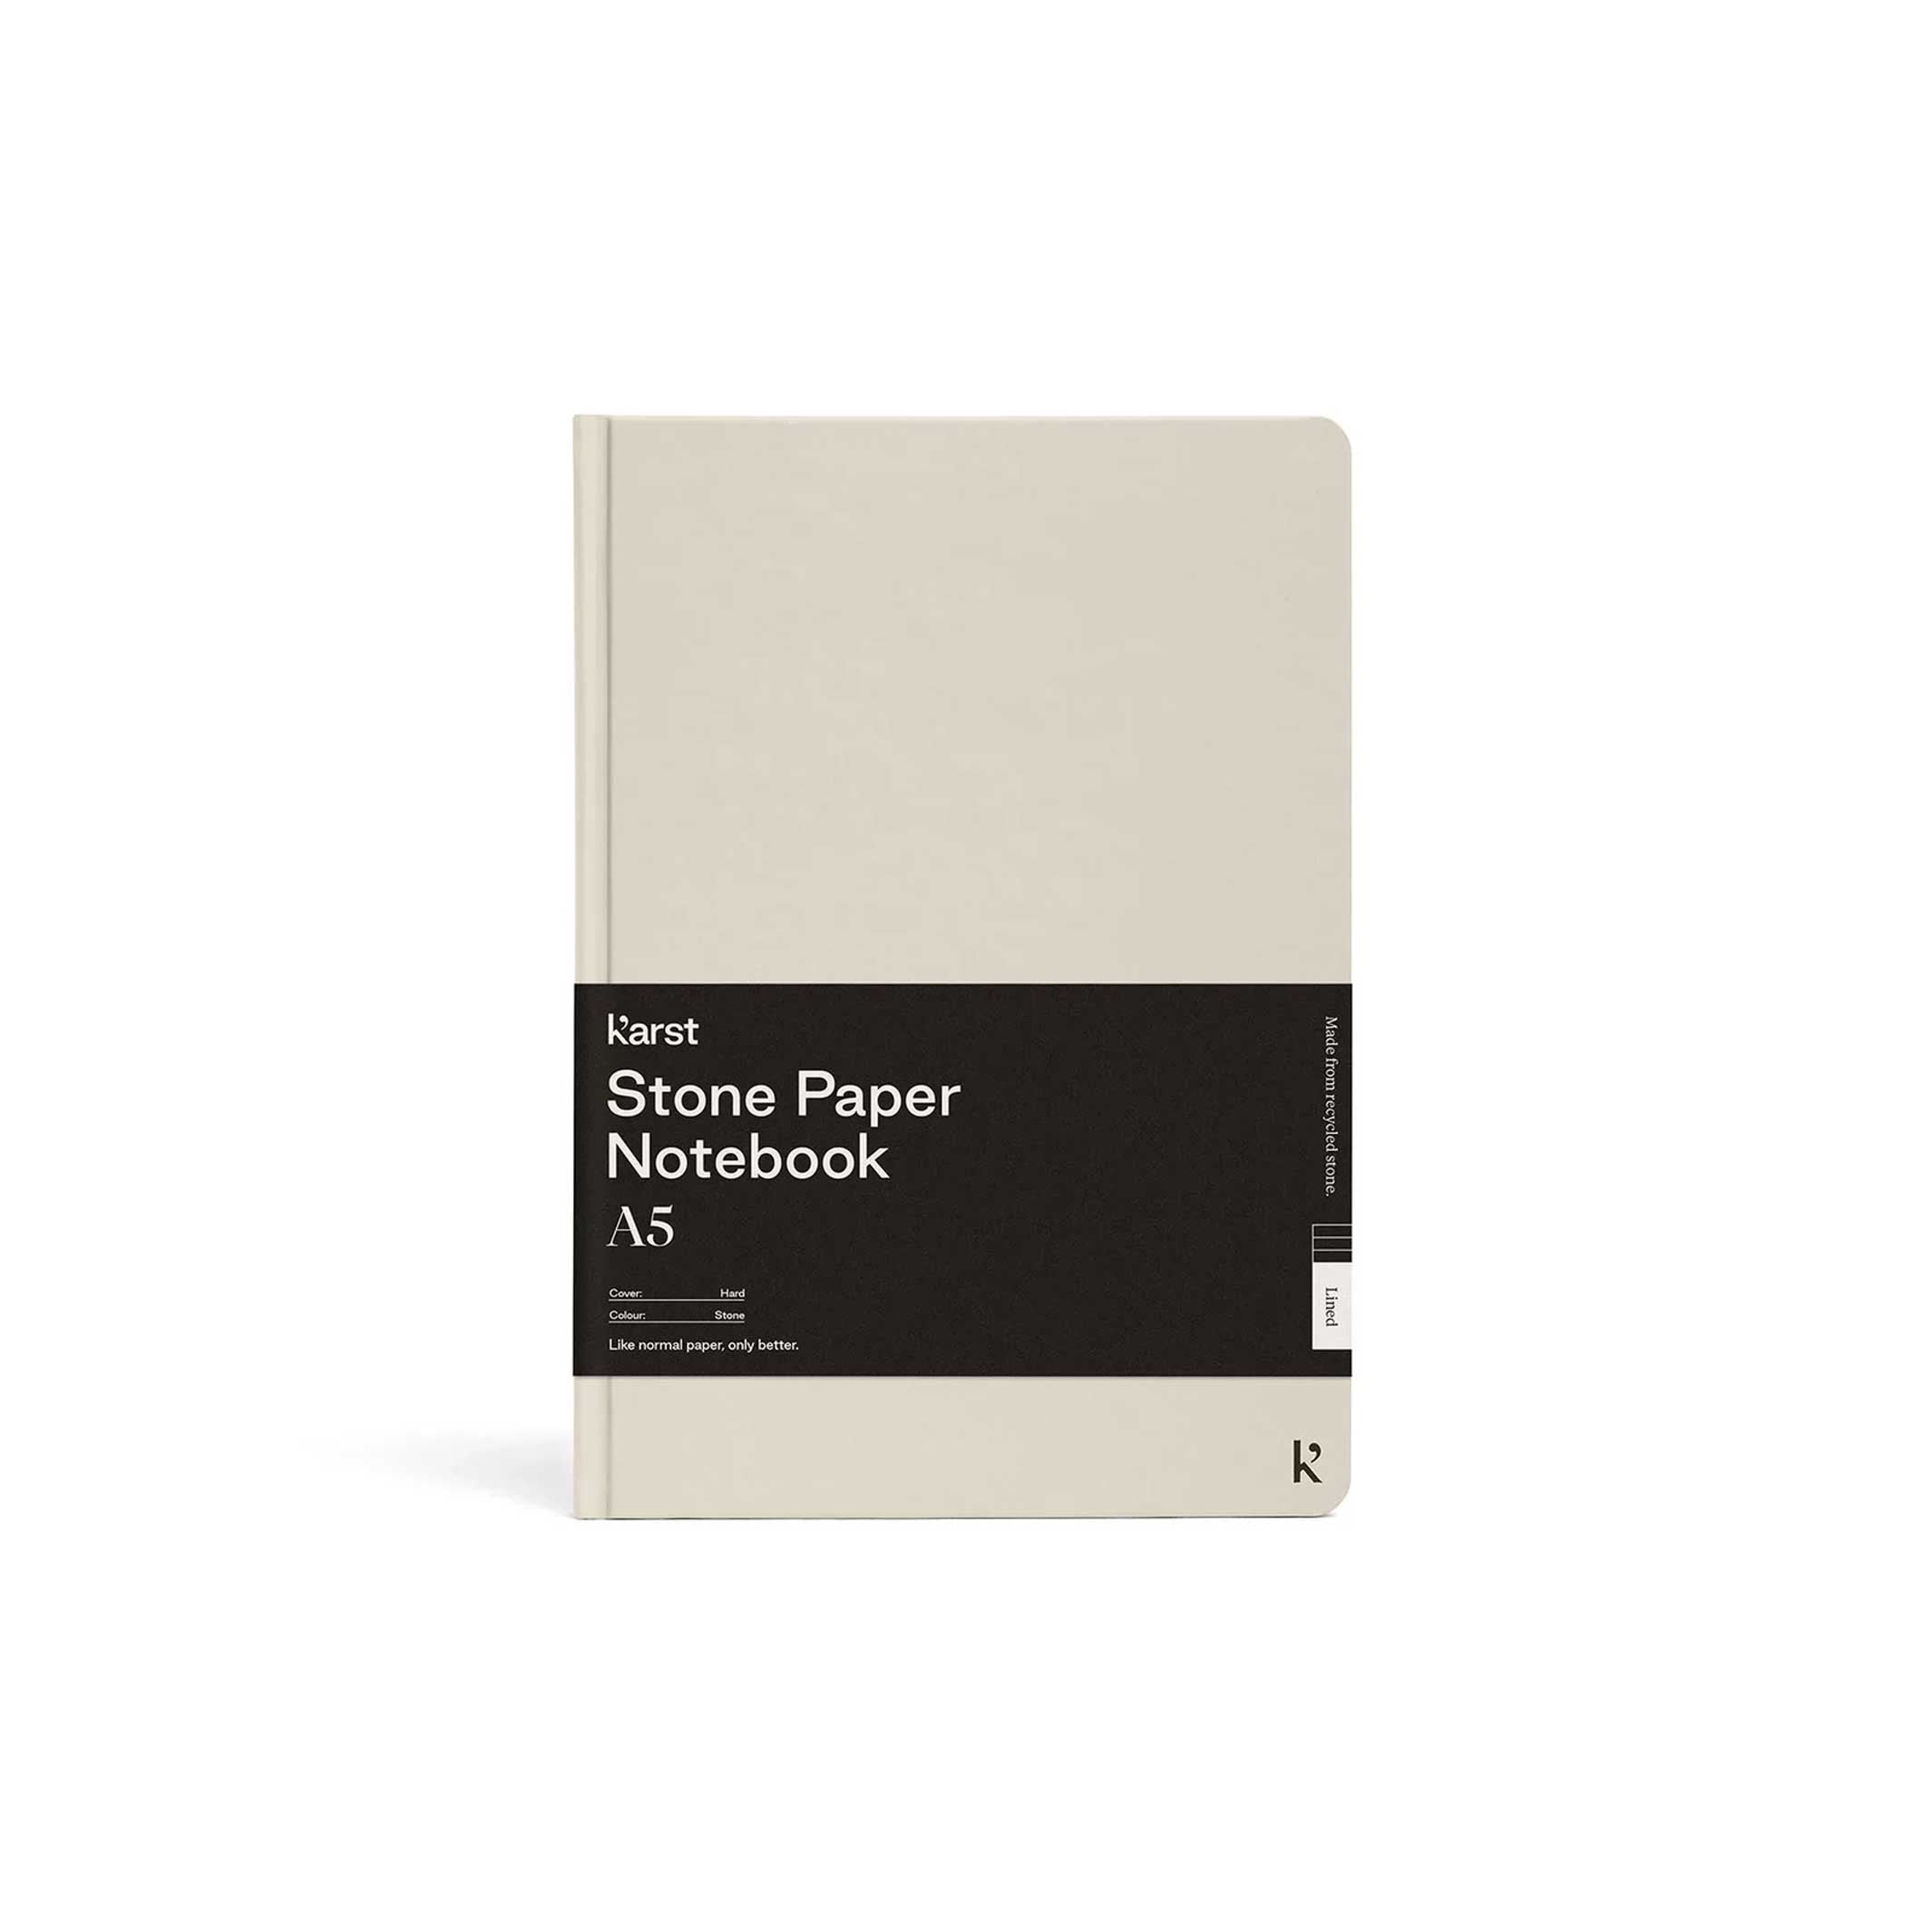 Hardcover NOTEBOOK A5 | Stone | Karst Stone Paper